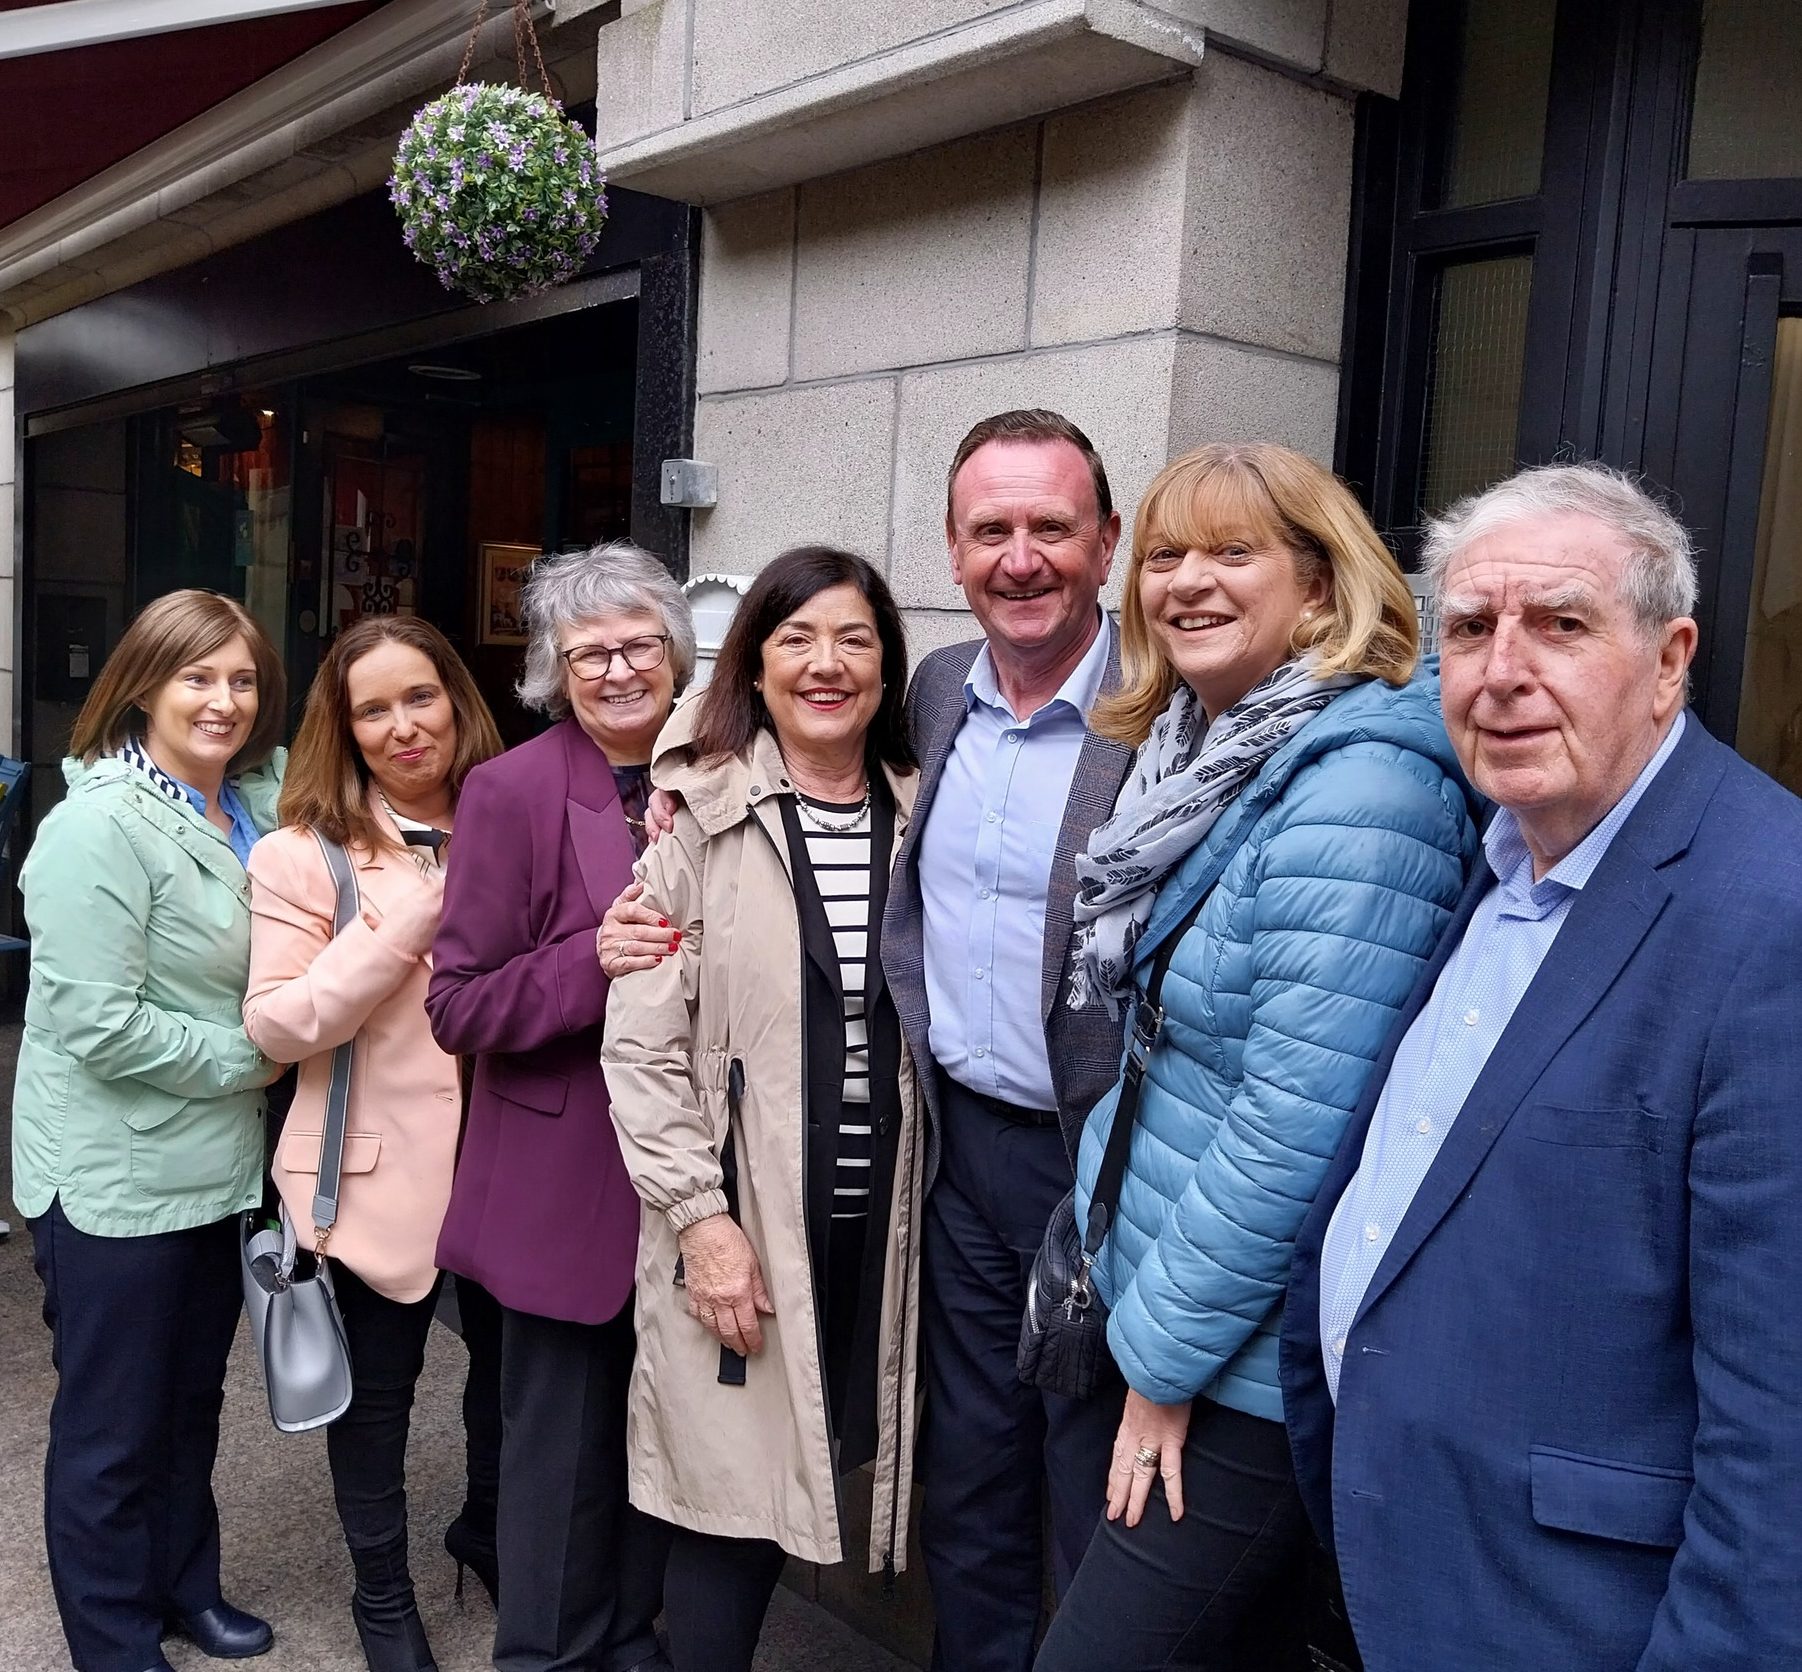 Travel Partners Group triumphant trade appreciation evening in The Deise. Happy Retirement to Colette O’Keeffe and Maria Molloy (Harvey Travel)